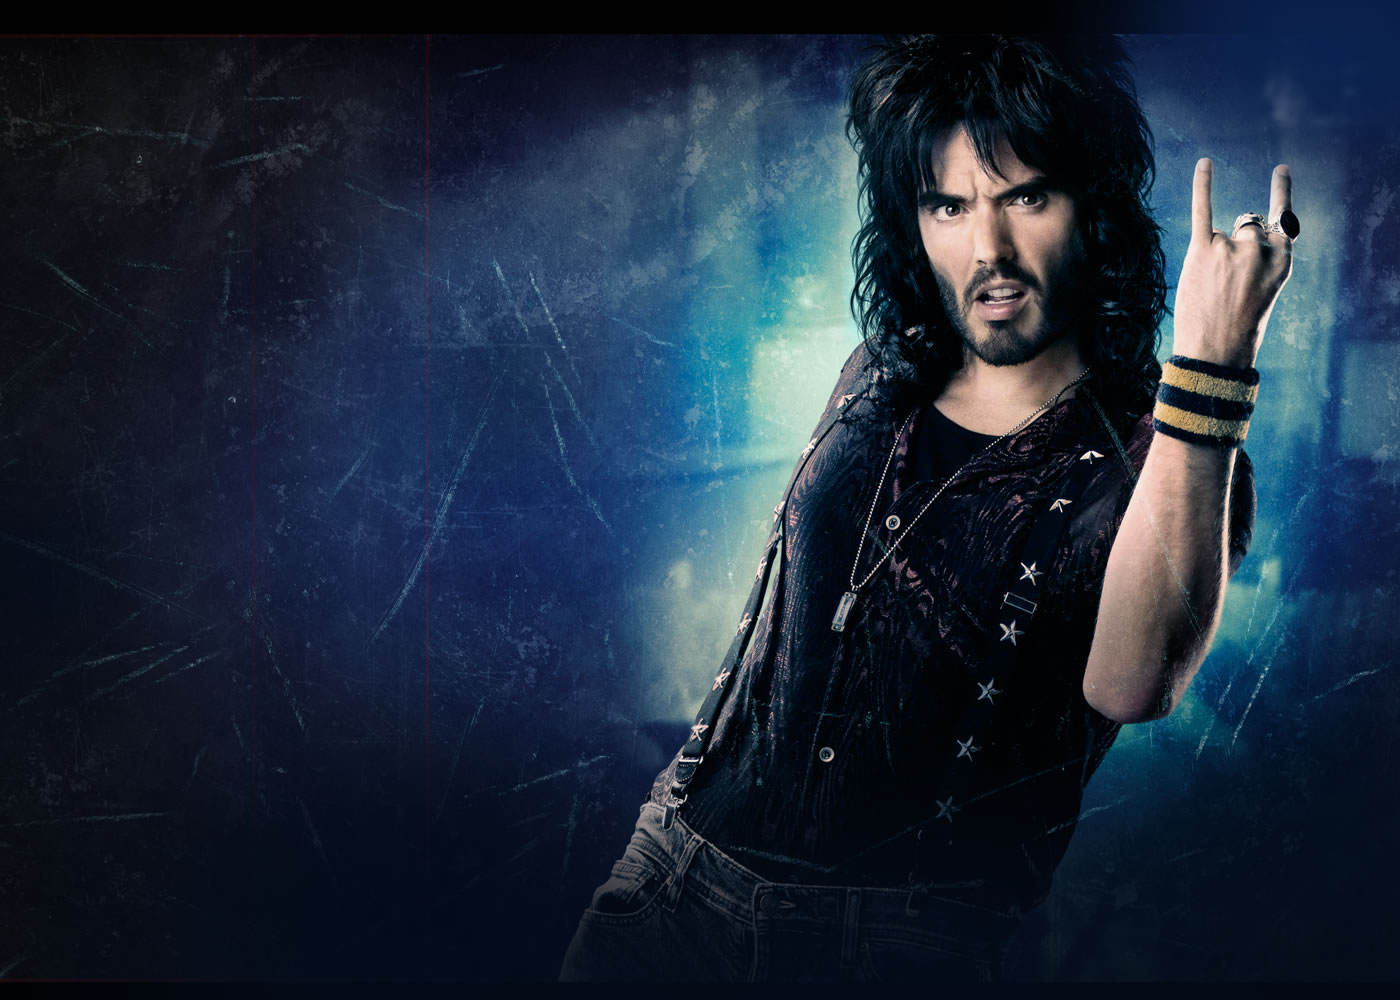 rock of ages movie is about